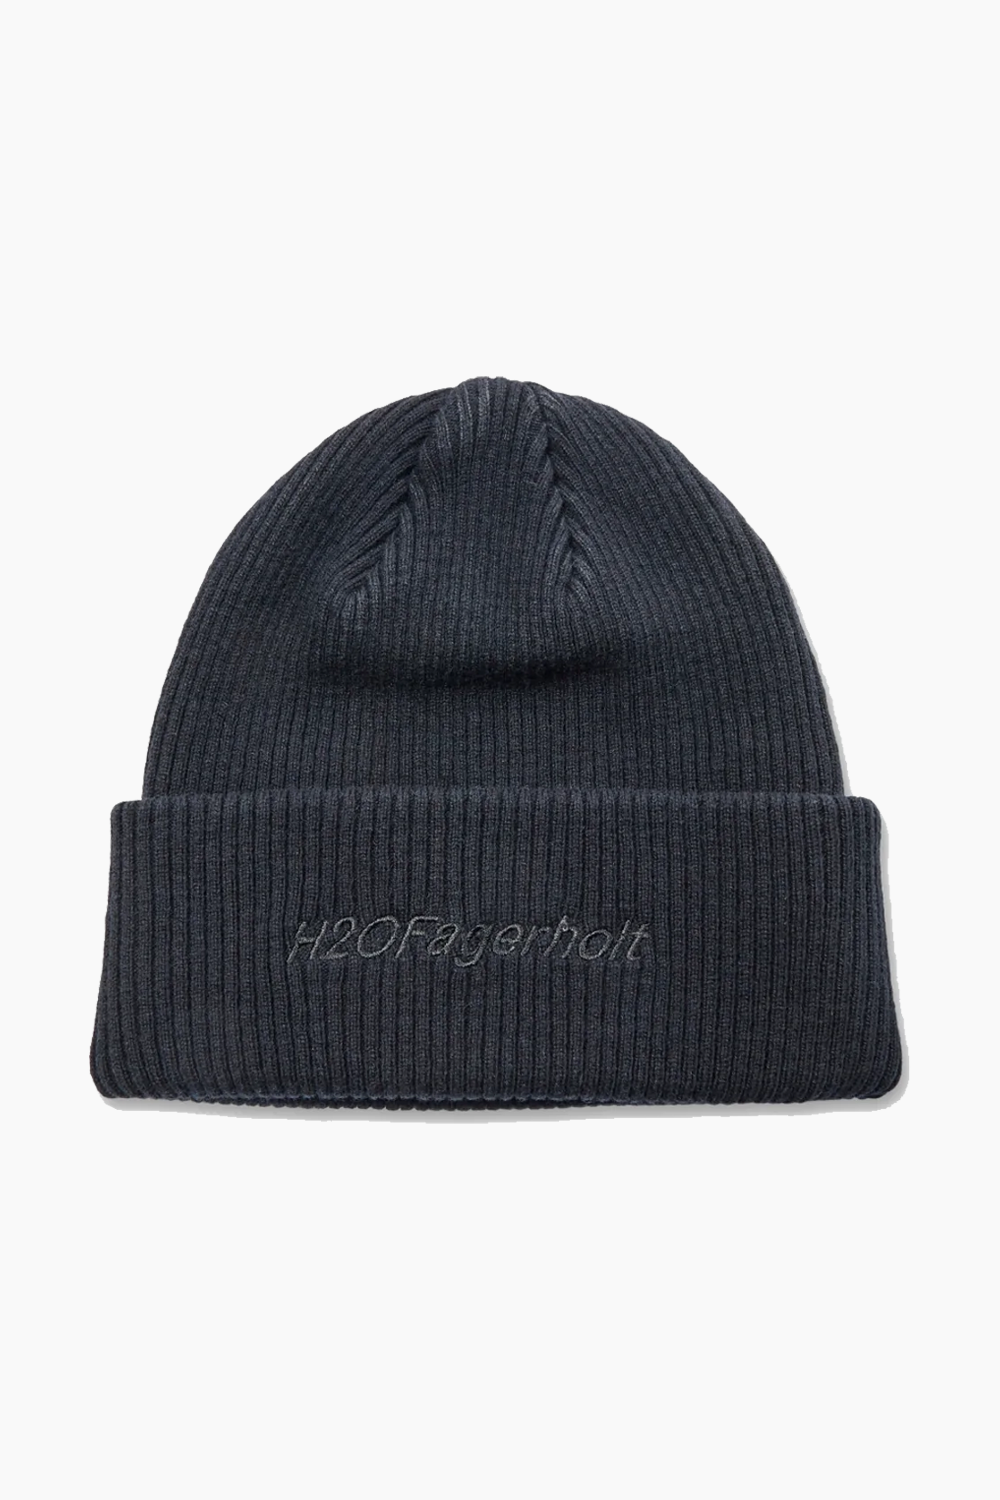 Cosy Hat - Black - H2O Fagerholt - Sort One Size